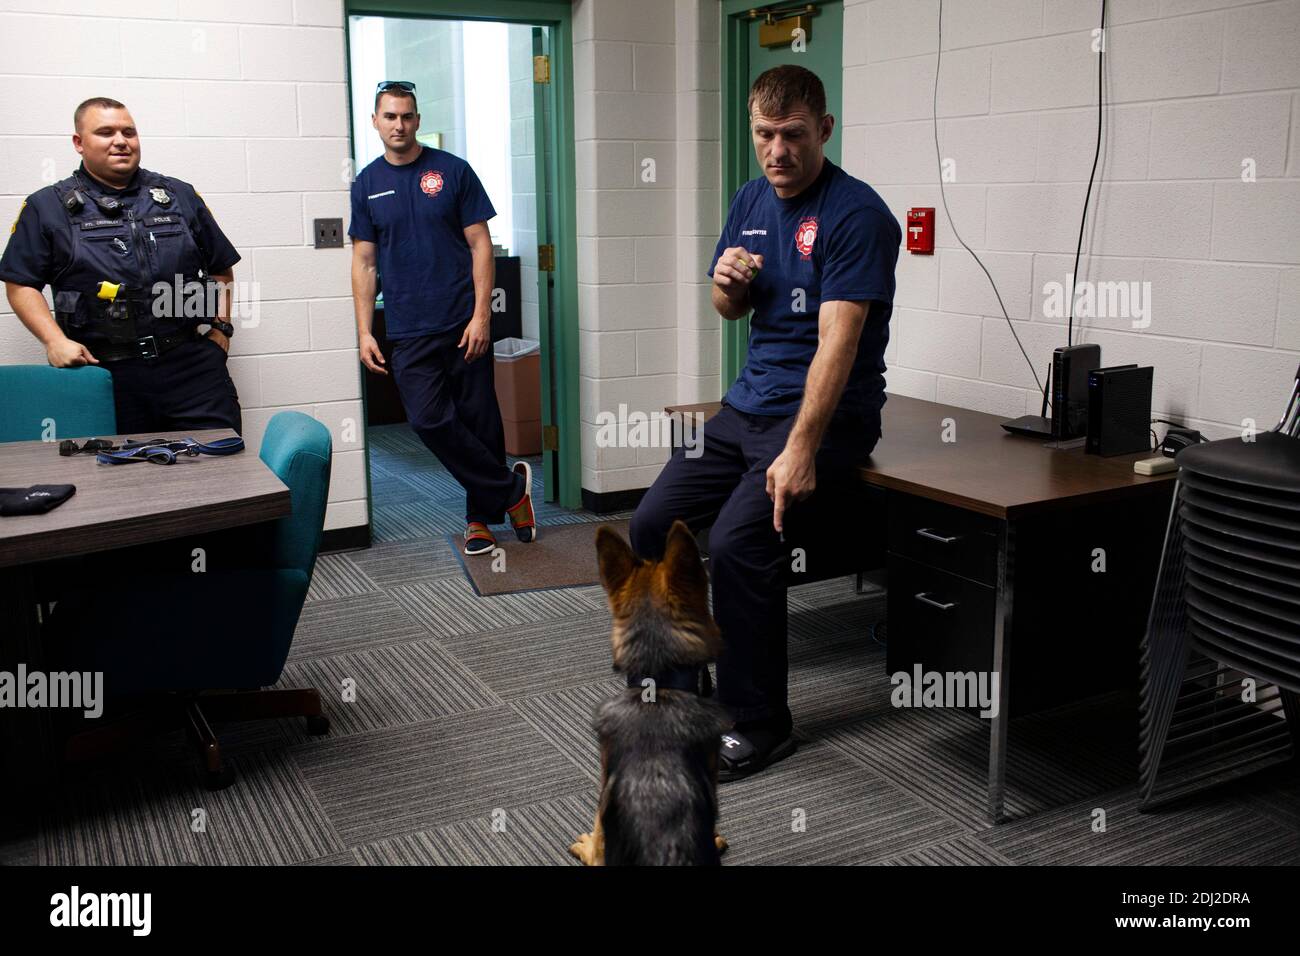 July 21, 2019: Former MMA heavyweight champ Stipe Miocic has been a part time Valley View, Ohio firefighter since 2010. (R) Stipe talks with Valley View Police officer (L) Ricky Crumbley and fellow fighter (C) Brett Dugas. Photo by Michael F McElroy Credit: Michael McElroy/ZUMA Wire/Alamy Live News Stock Photo